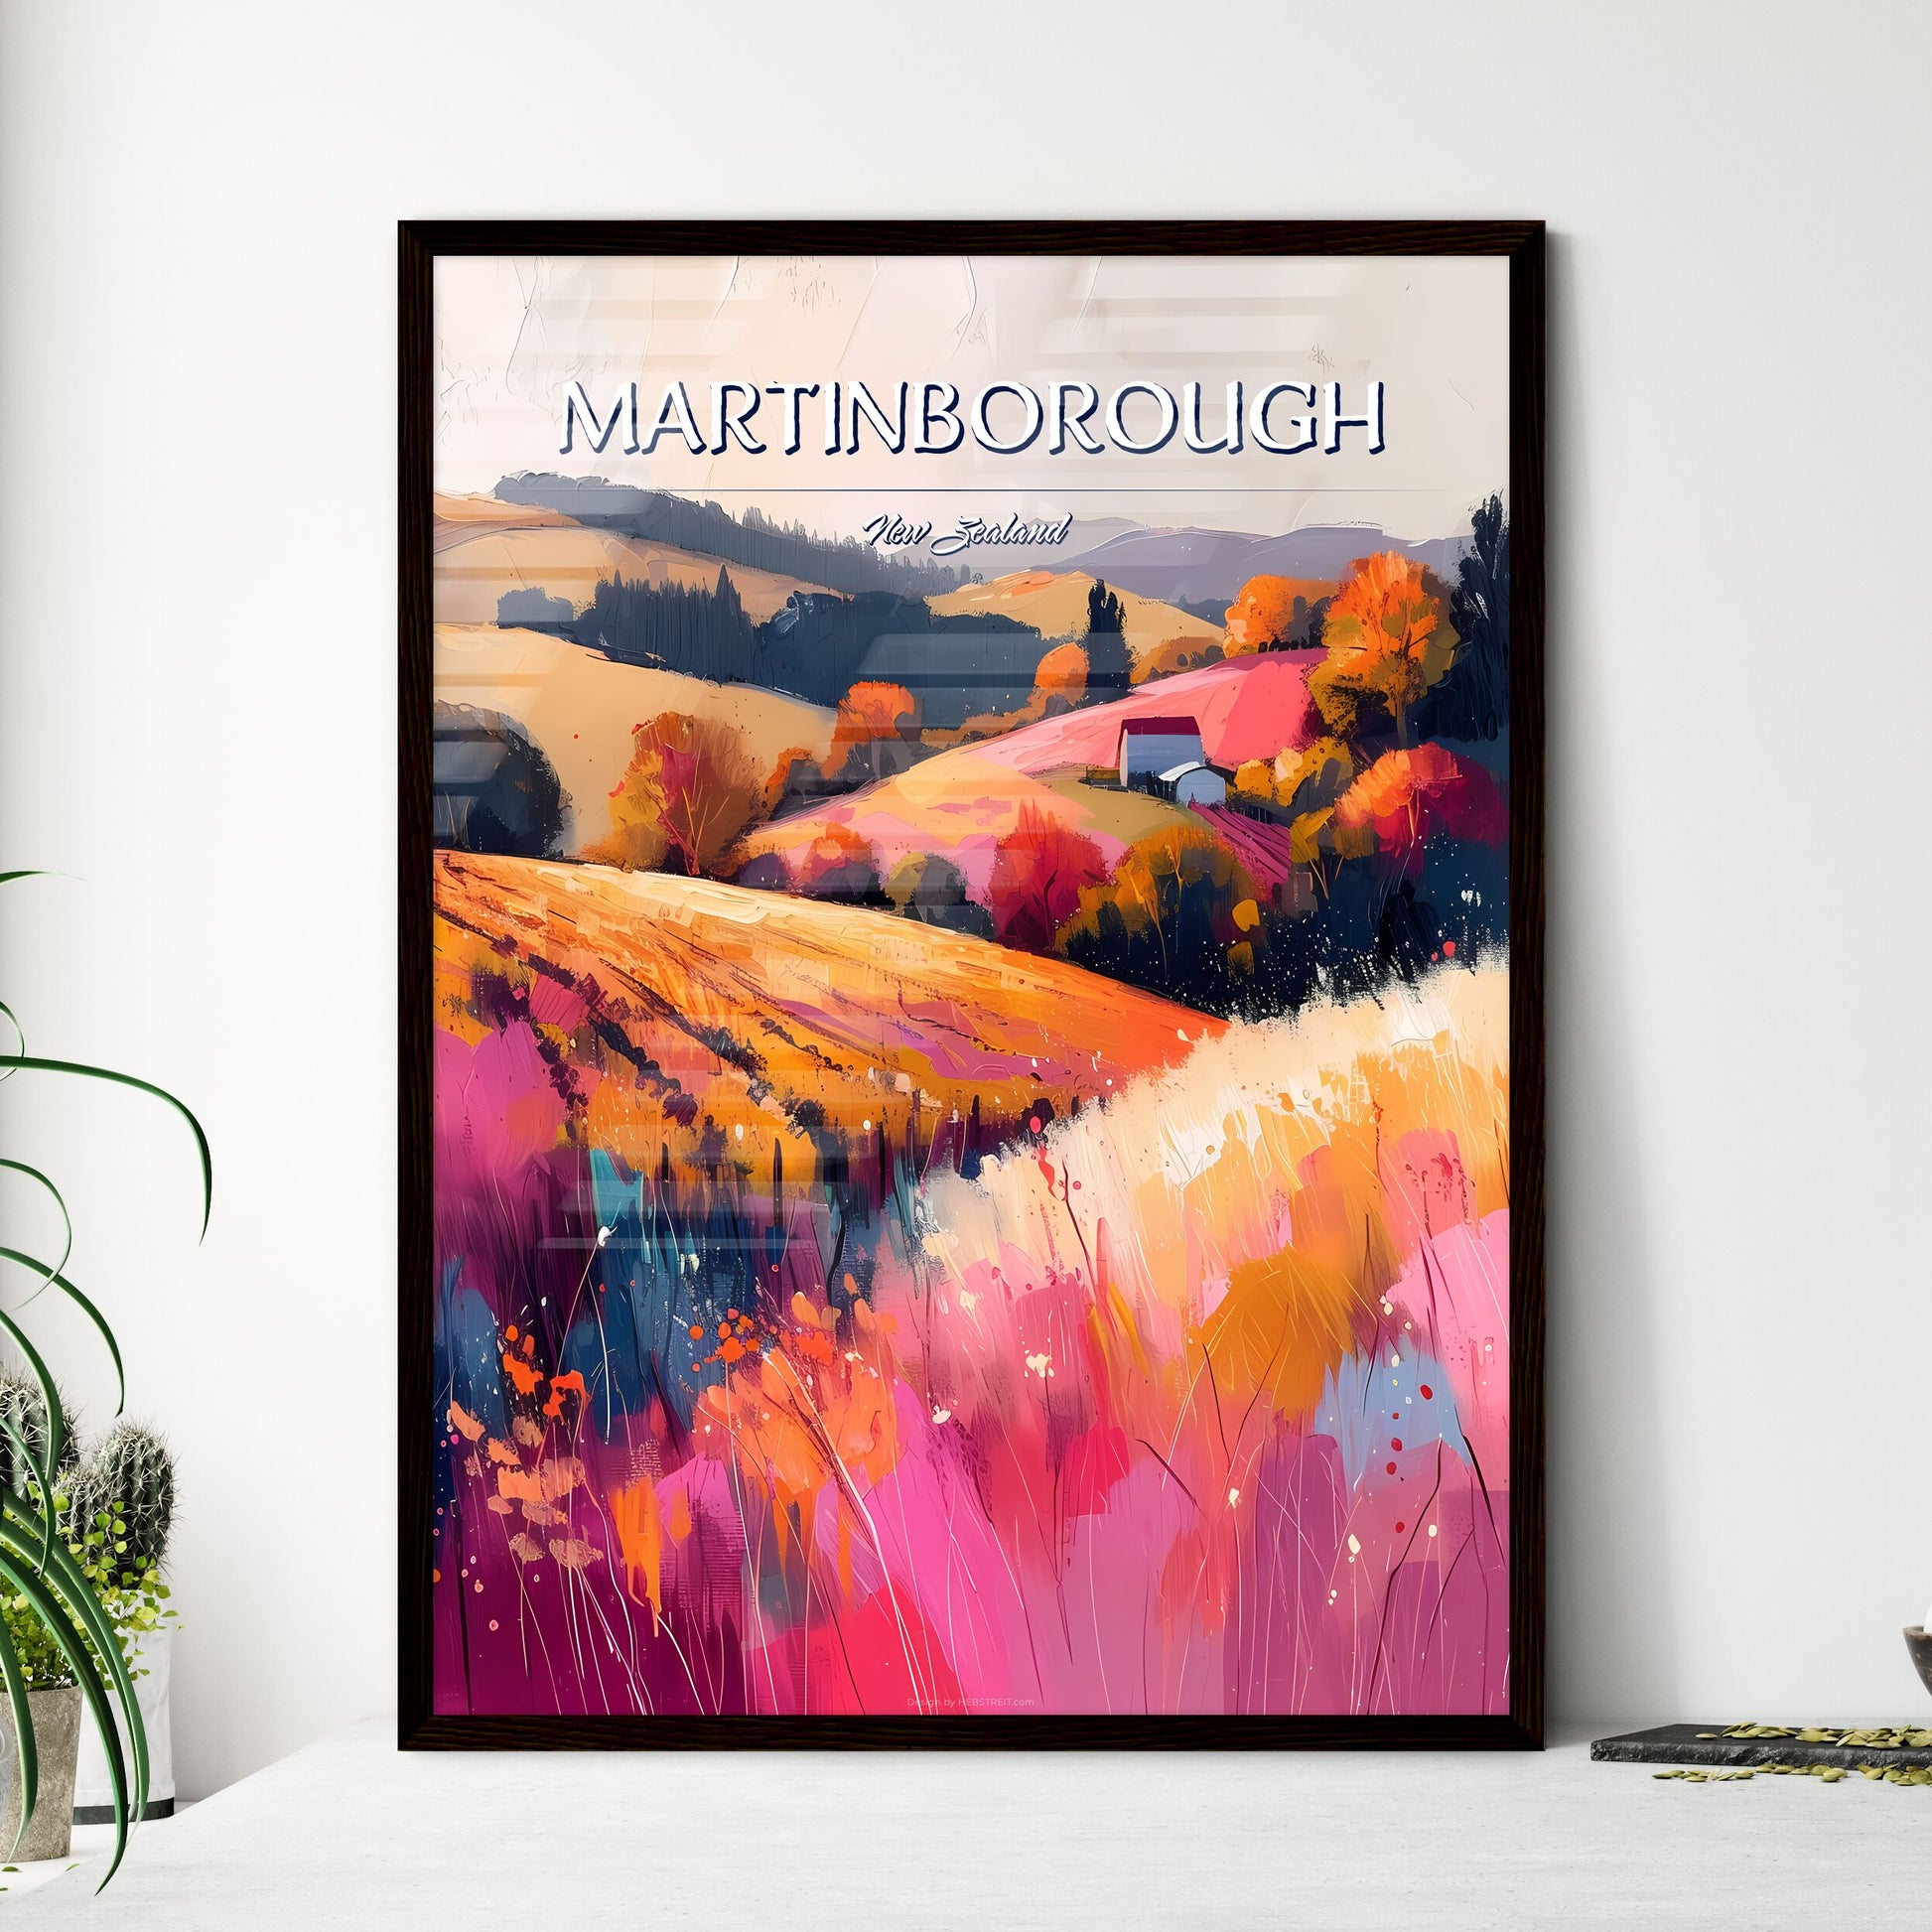 Martinborough, New Zealand - Art print of a painting of a field of flowers and trees Default Title